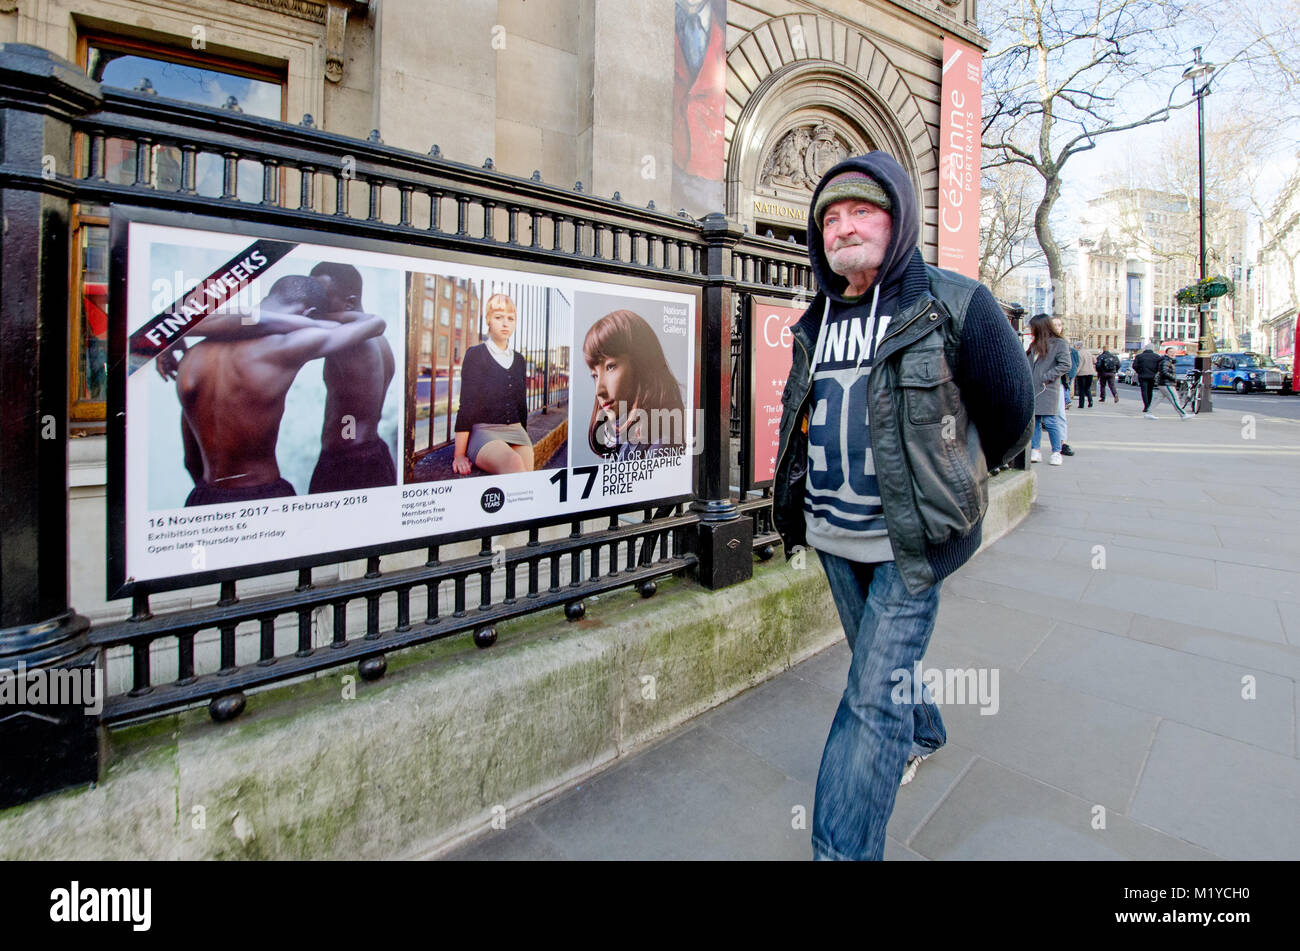 London, England, UK. Man walking past the National Portrait Gallery, St Martin's Place during a Photographic Portrait Prize exhibition Stock Photo